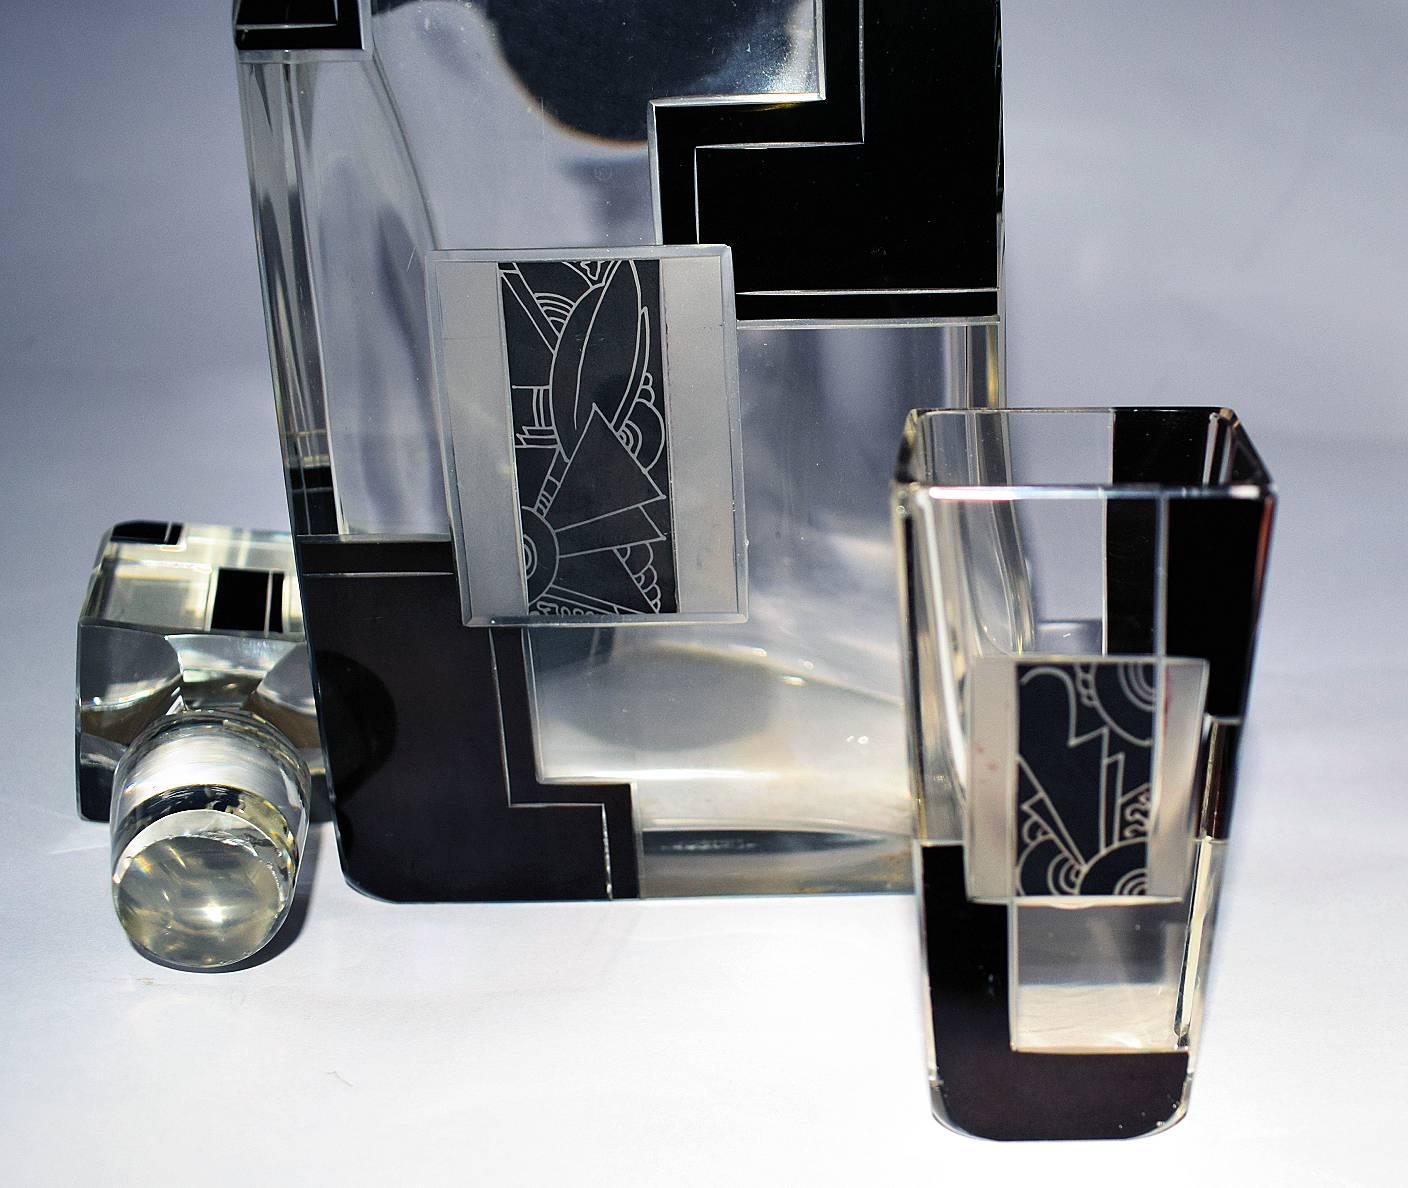 Very stylish Art Deco decanter set comprising decanter and glasses. Please not the tray shown is not part of this sale but can be purchased separately. Huge cut-glass decanter and six oblong shaped glasses. The decanter is deceptively heavy and is